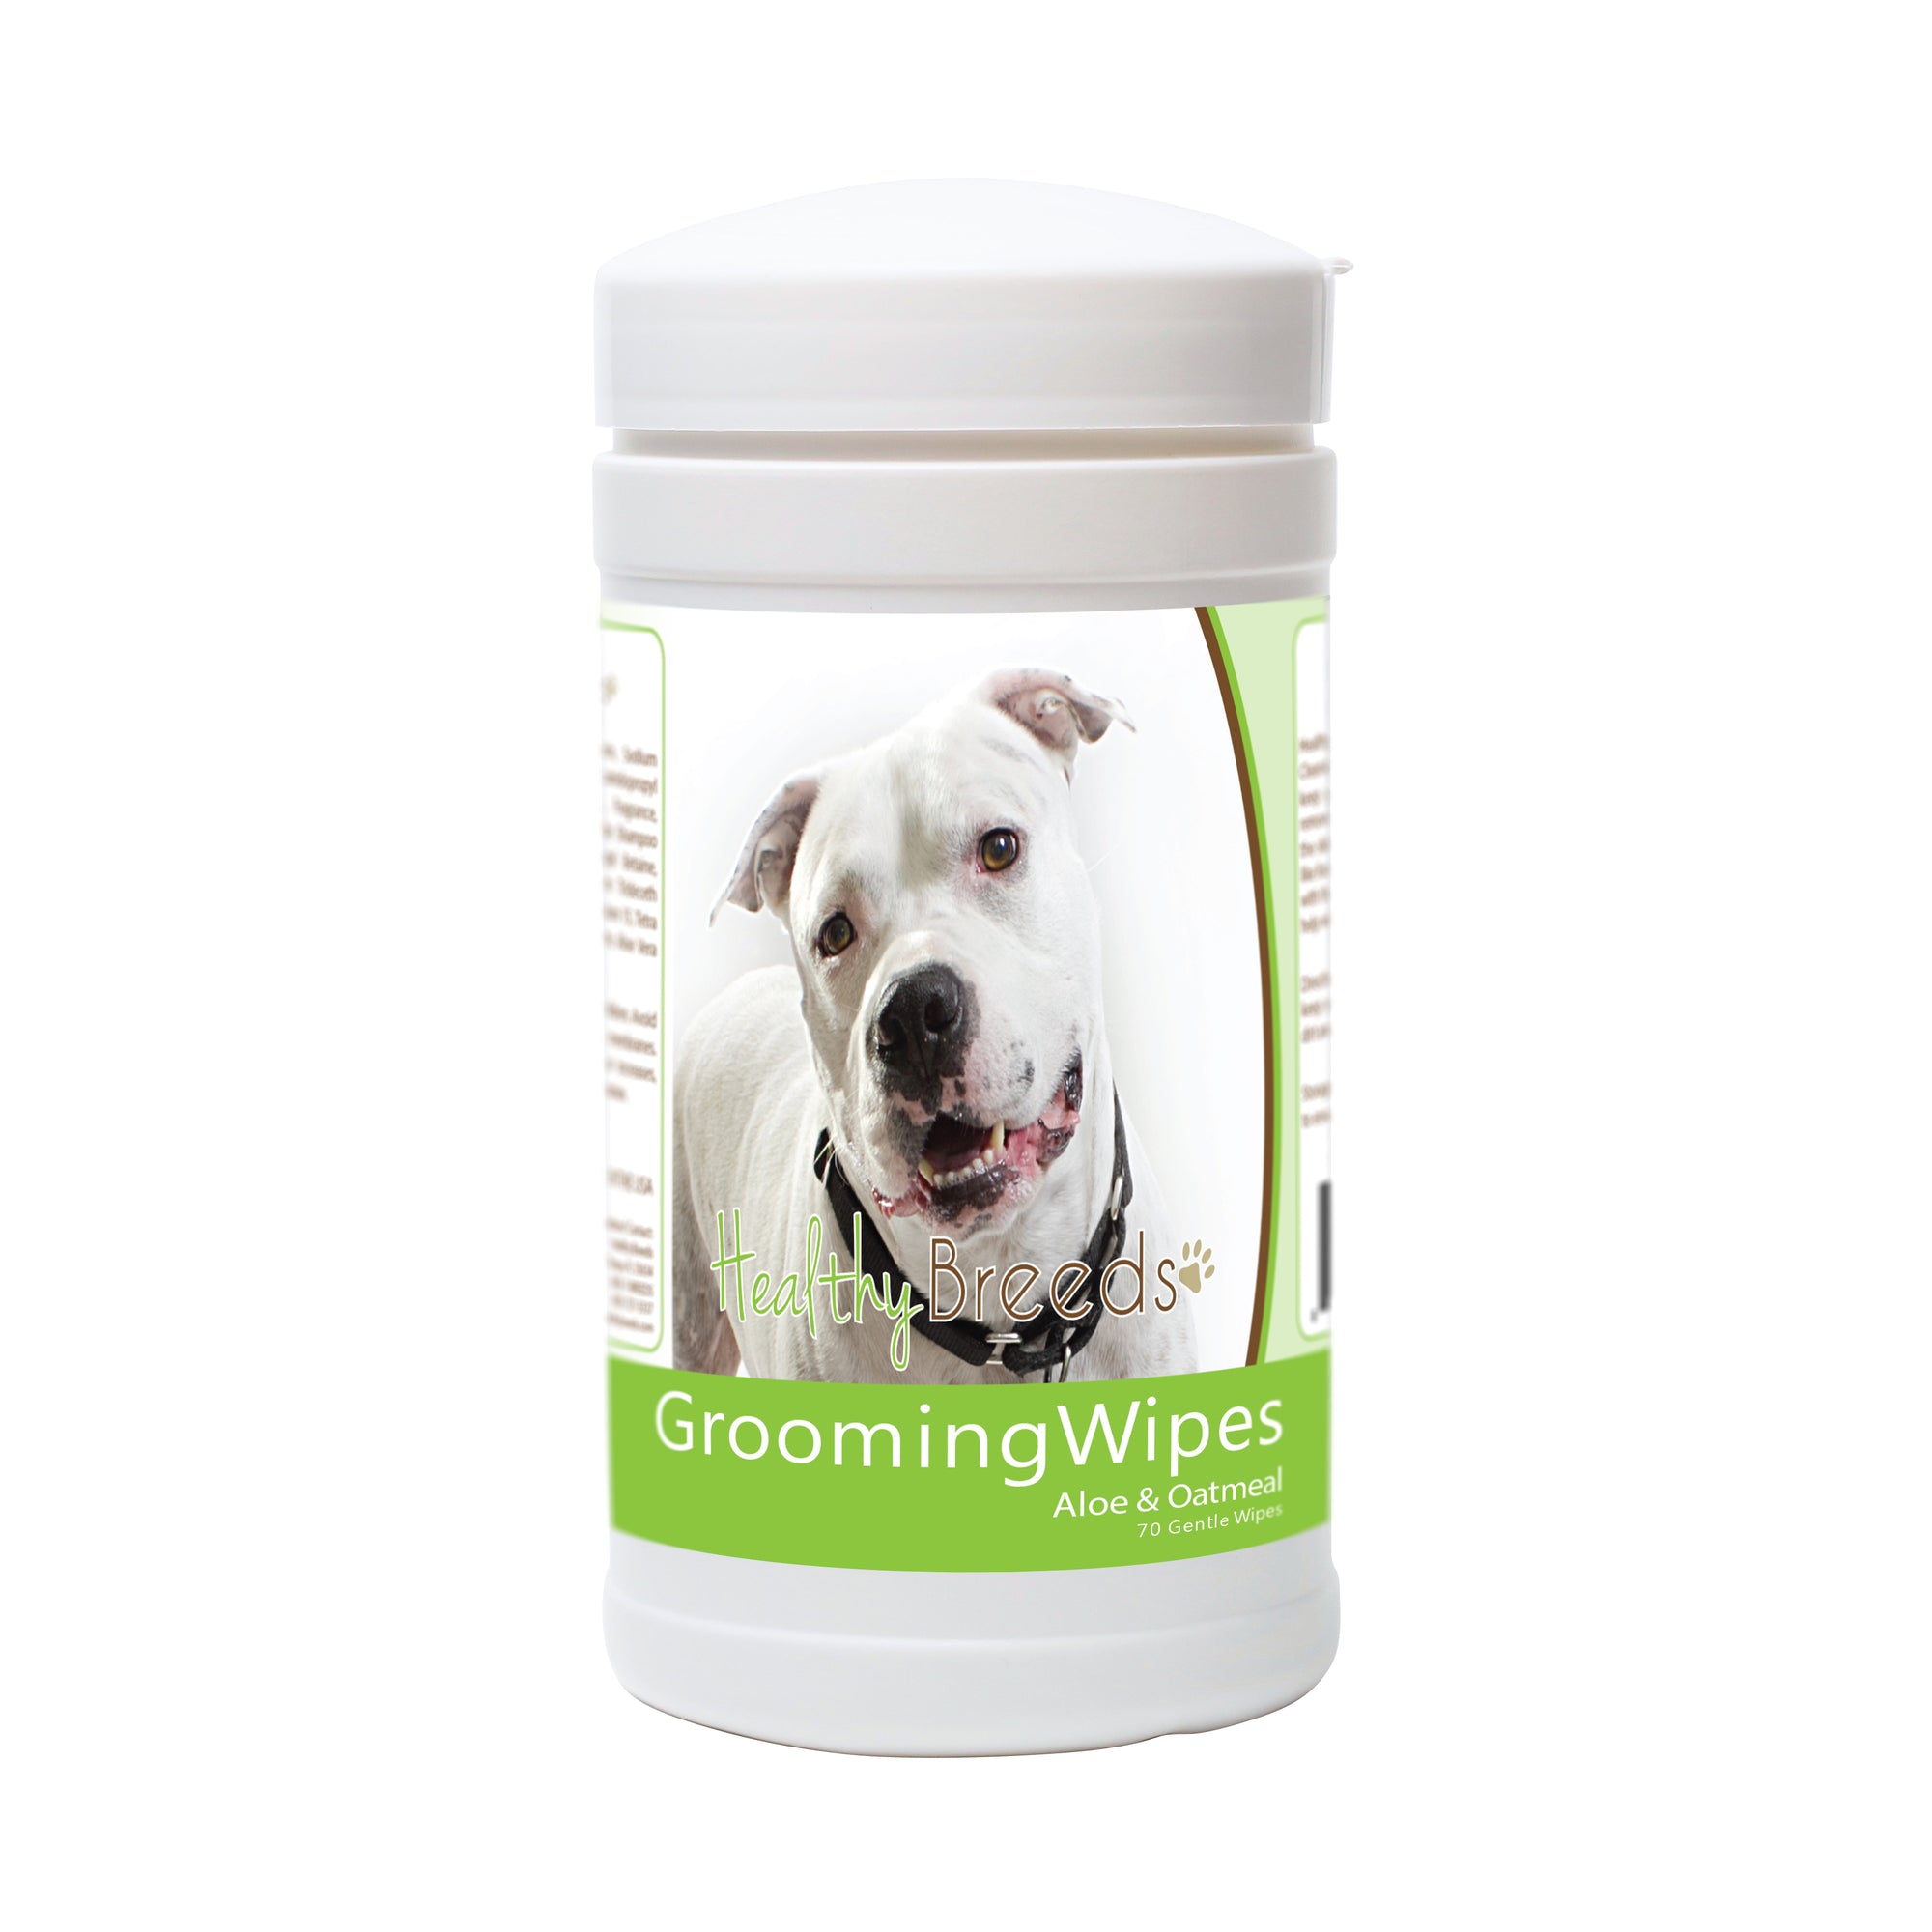 Healthy Breeds Pit Bull Grooming Wipes 70 Count